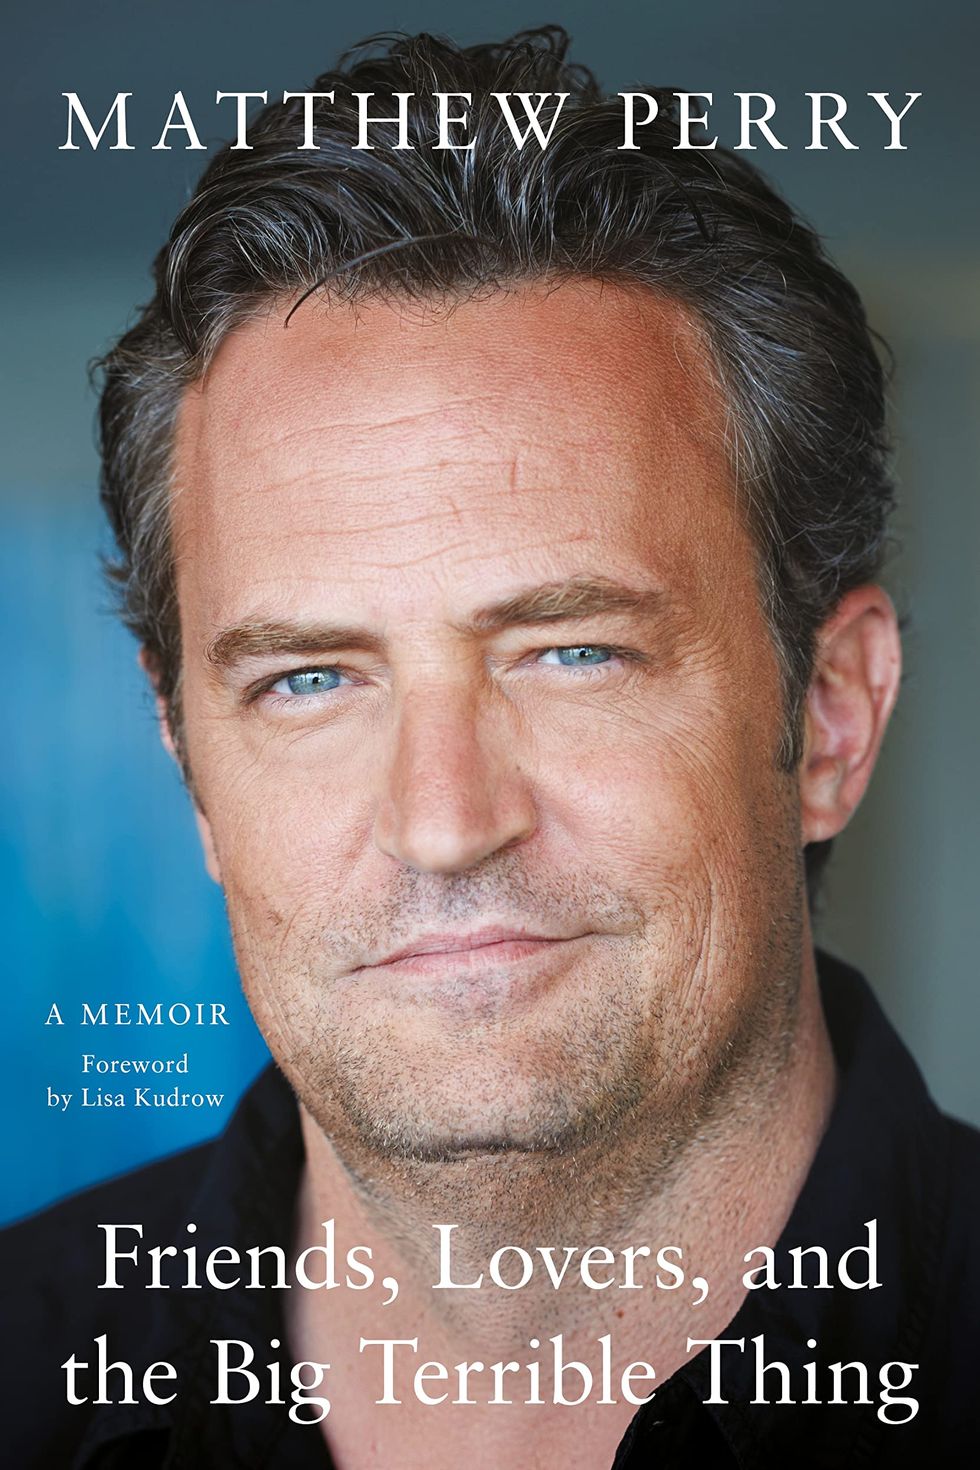 Matthew Perry, 'Friends, Lovers And The Big Terrible Thing'